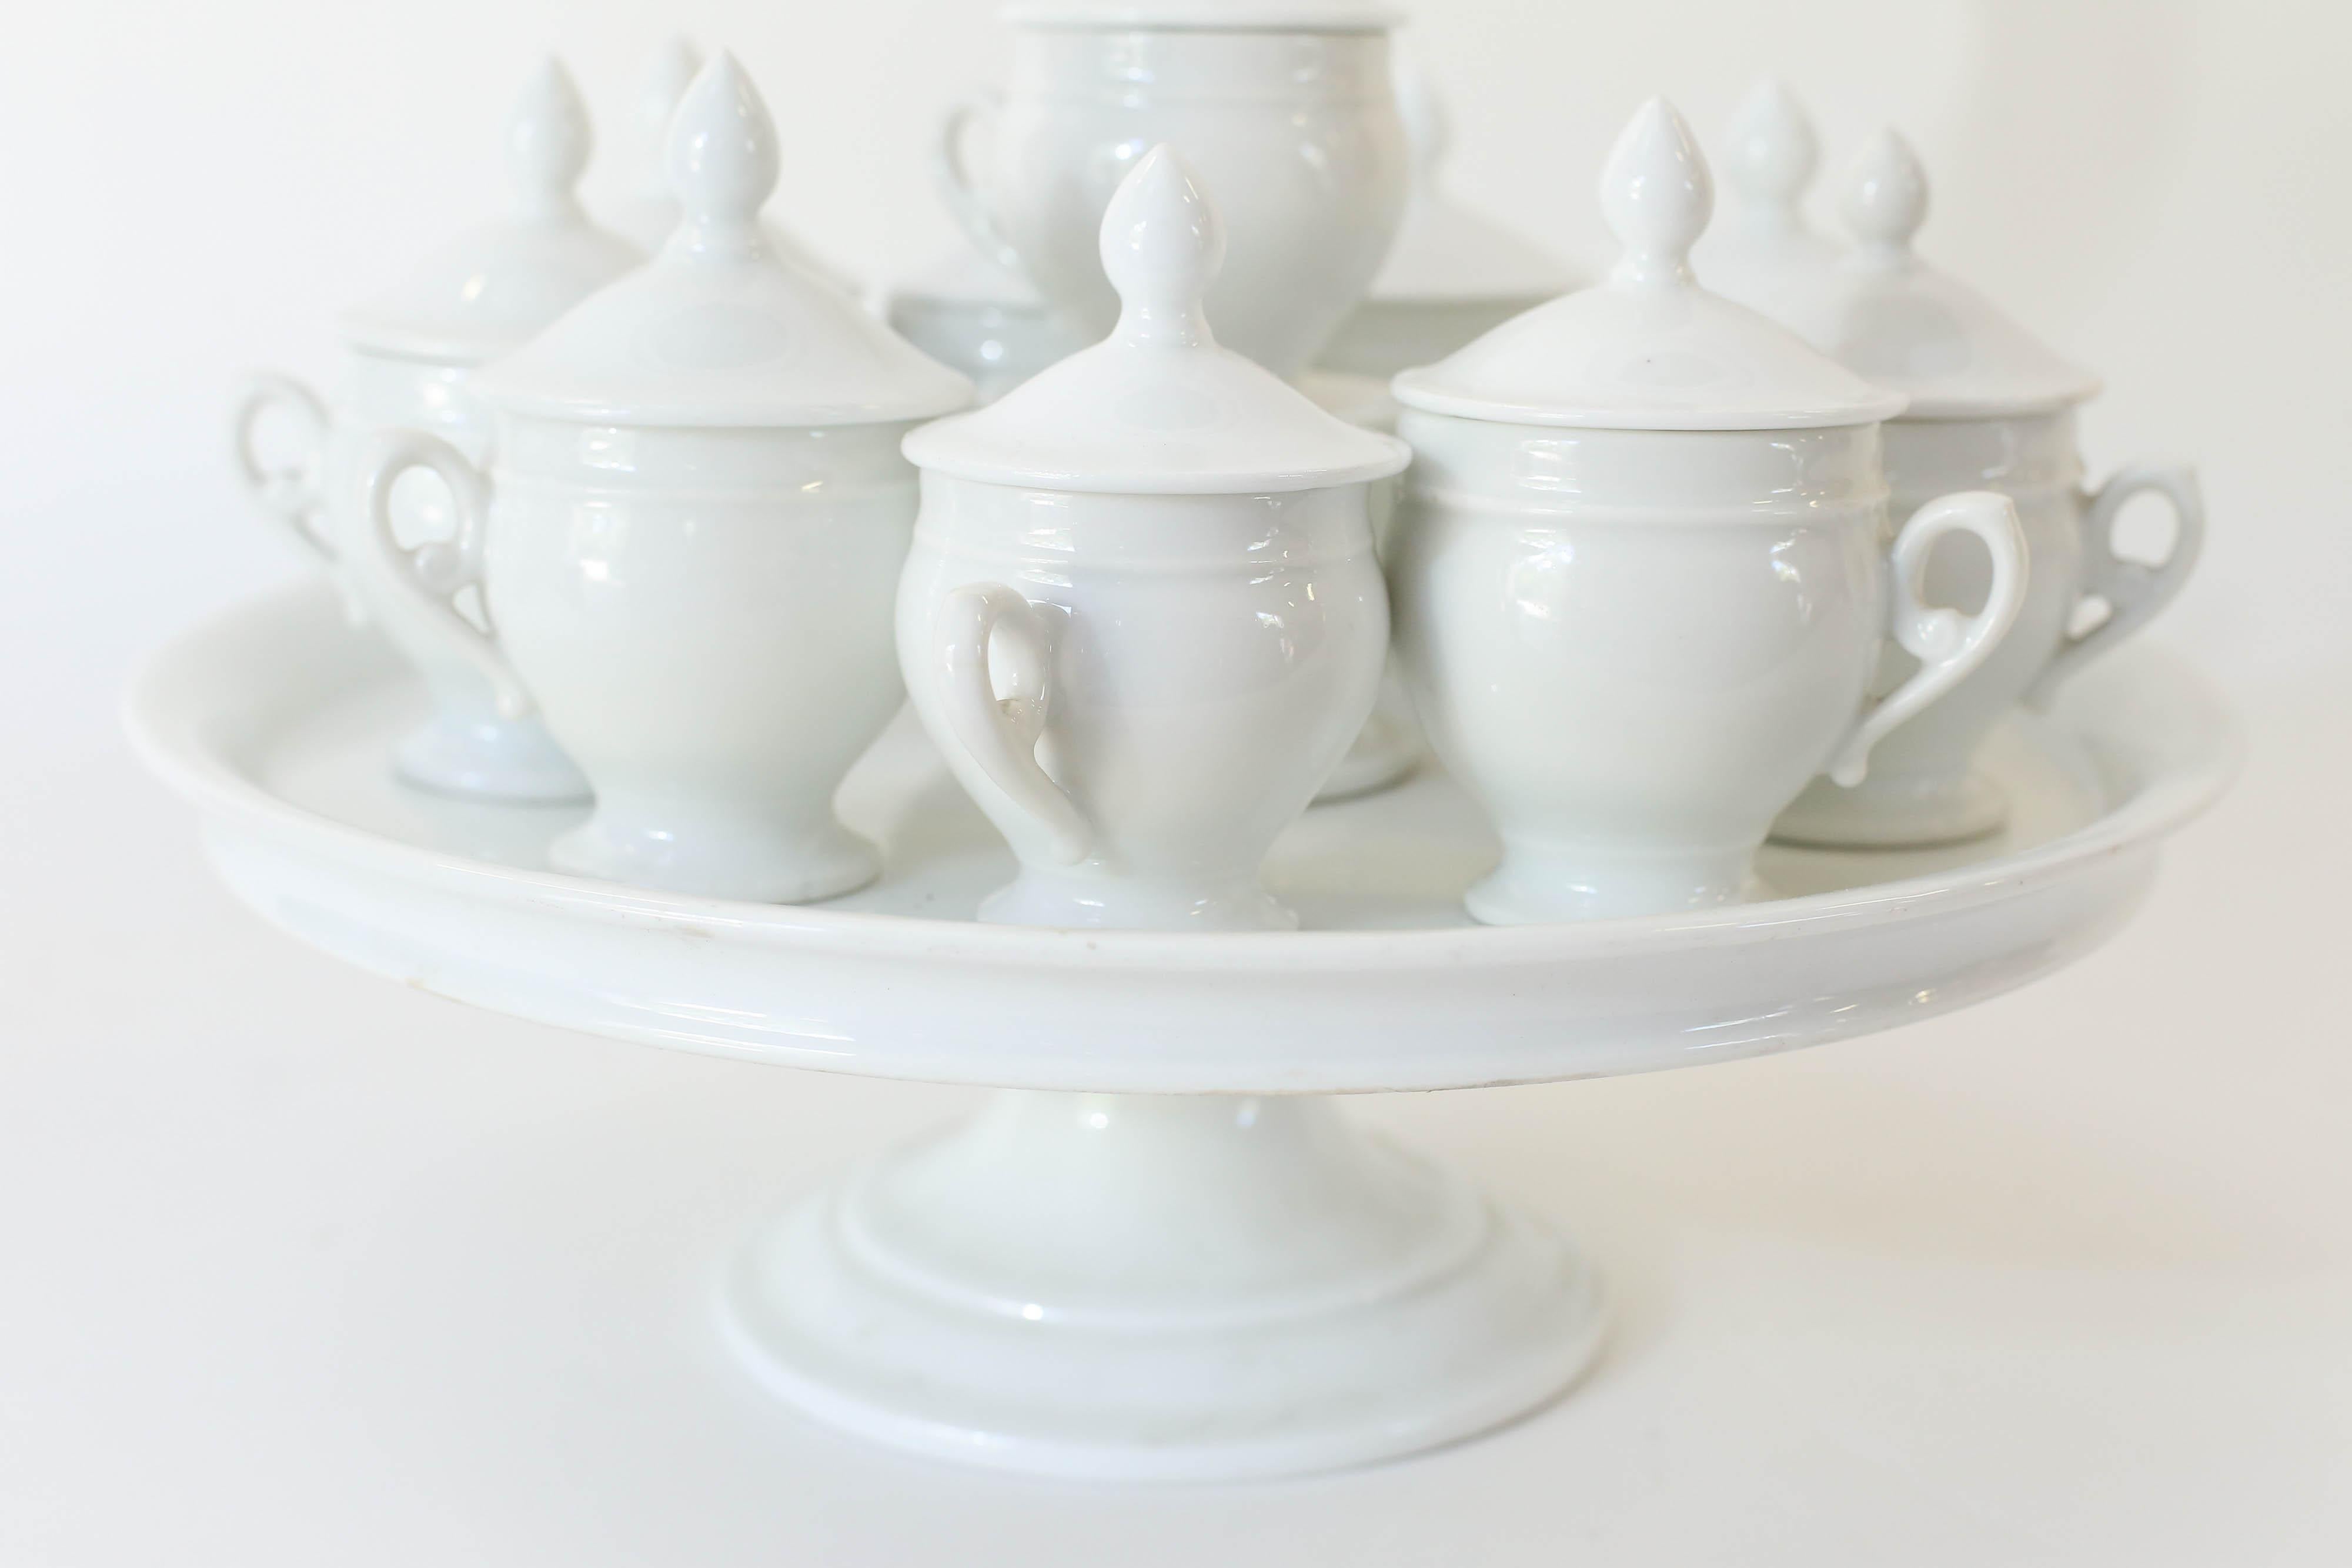 Pots de Creme, (cups of cream) tiered Stand and 10 lidded cups in white. These were used to serve desserts of cold custard. This dessert was made in pots, (cups) with their own lids to protect the custard during baking. A beautiful set for a